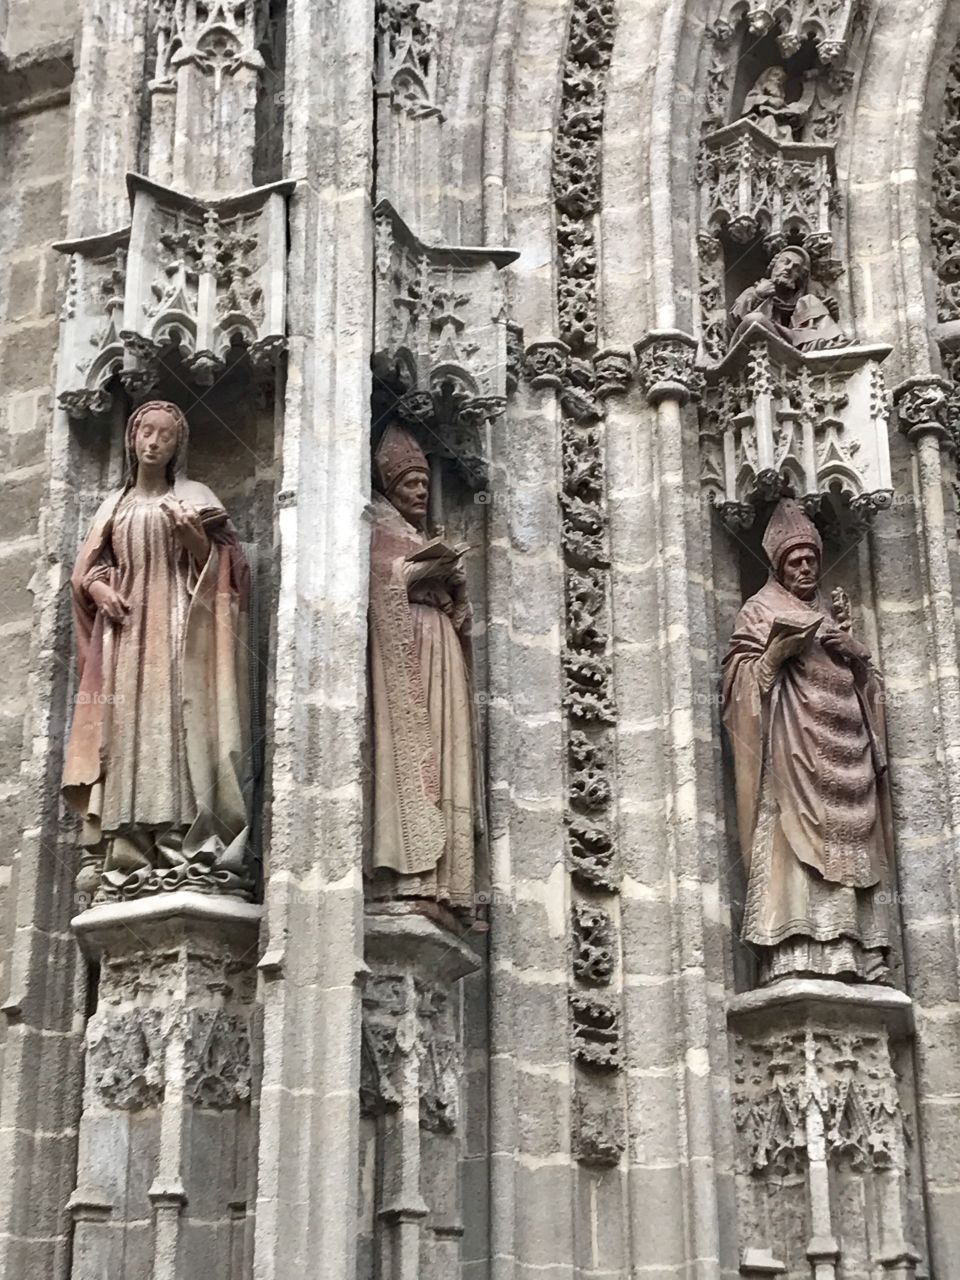 The sunlight was perfect to bring out the colour of the marble in the sculptures on the walls of the Cathedral in Seville! 